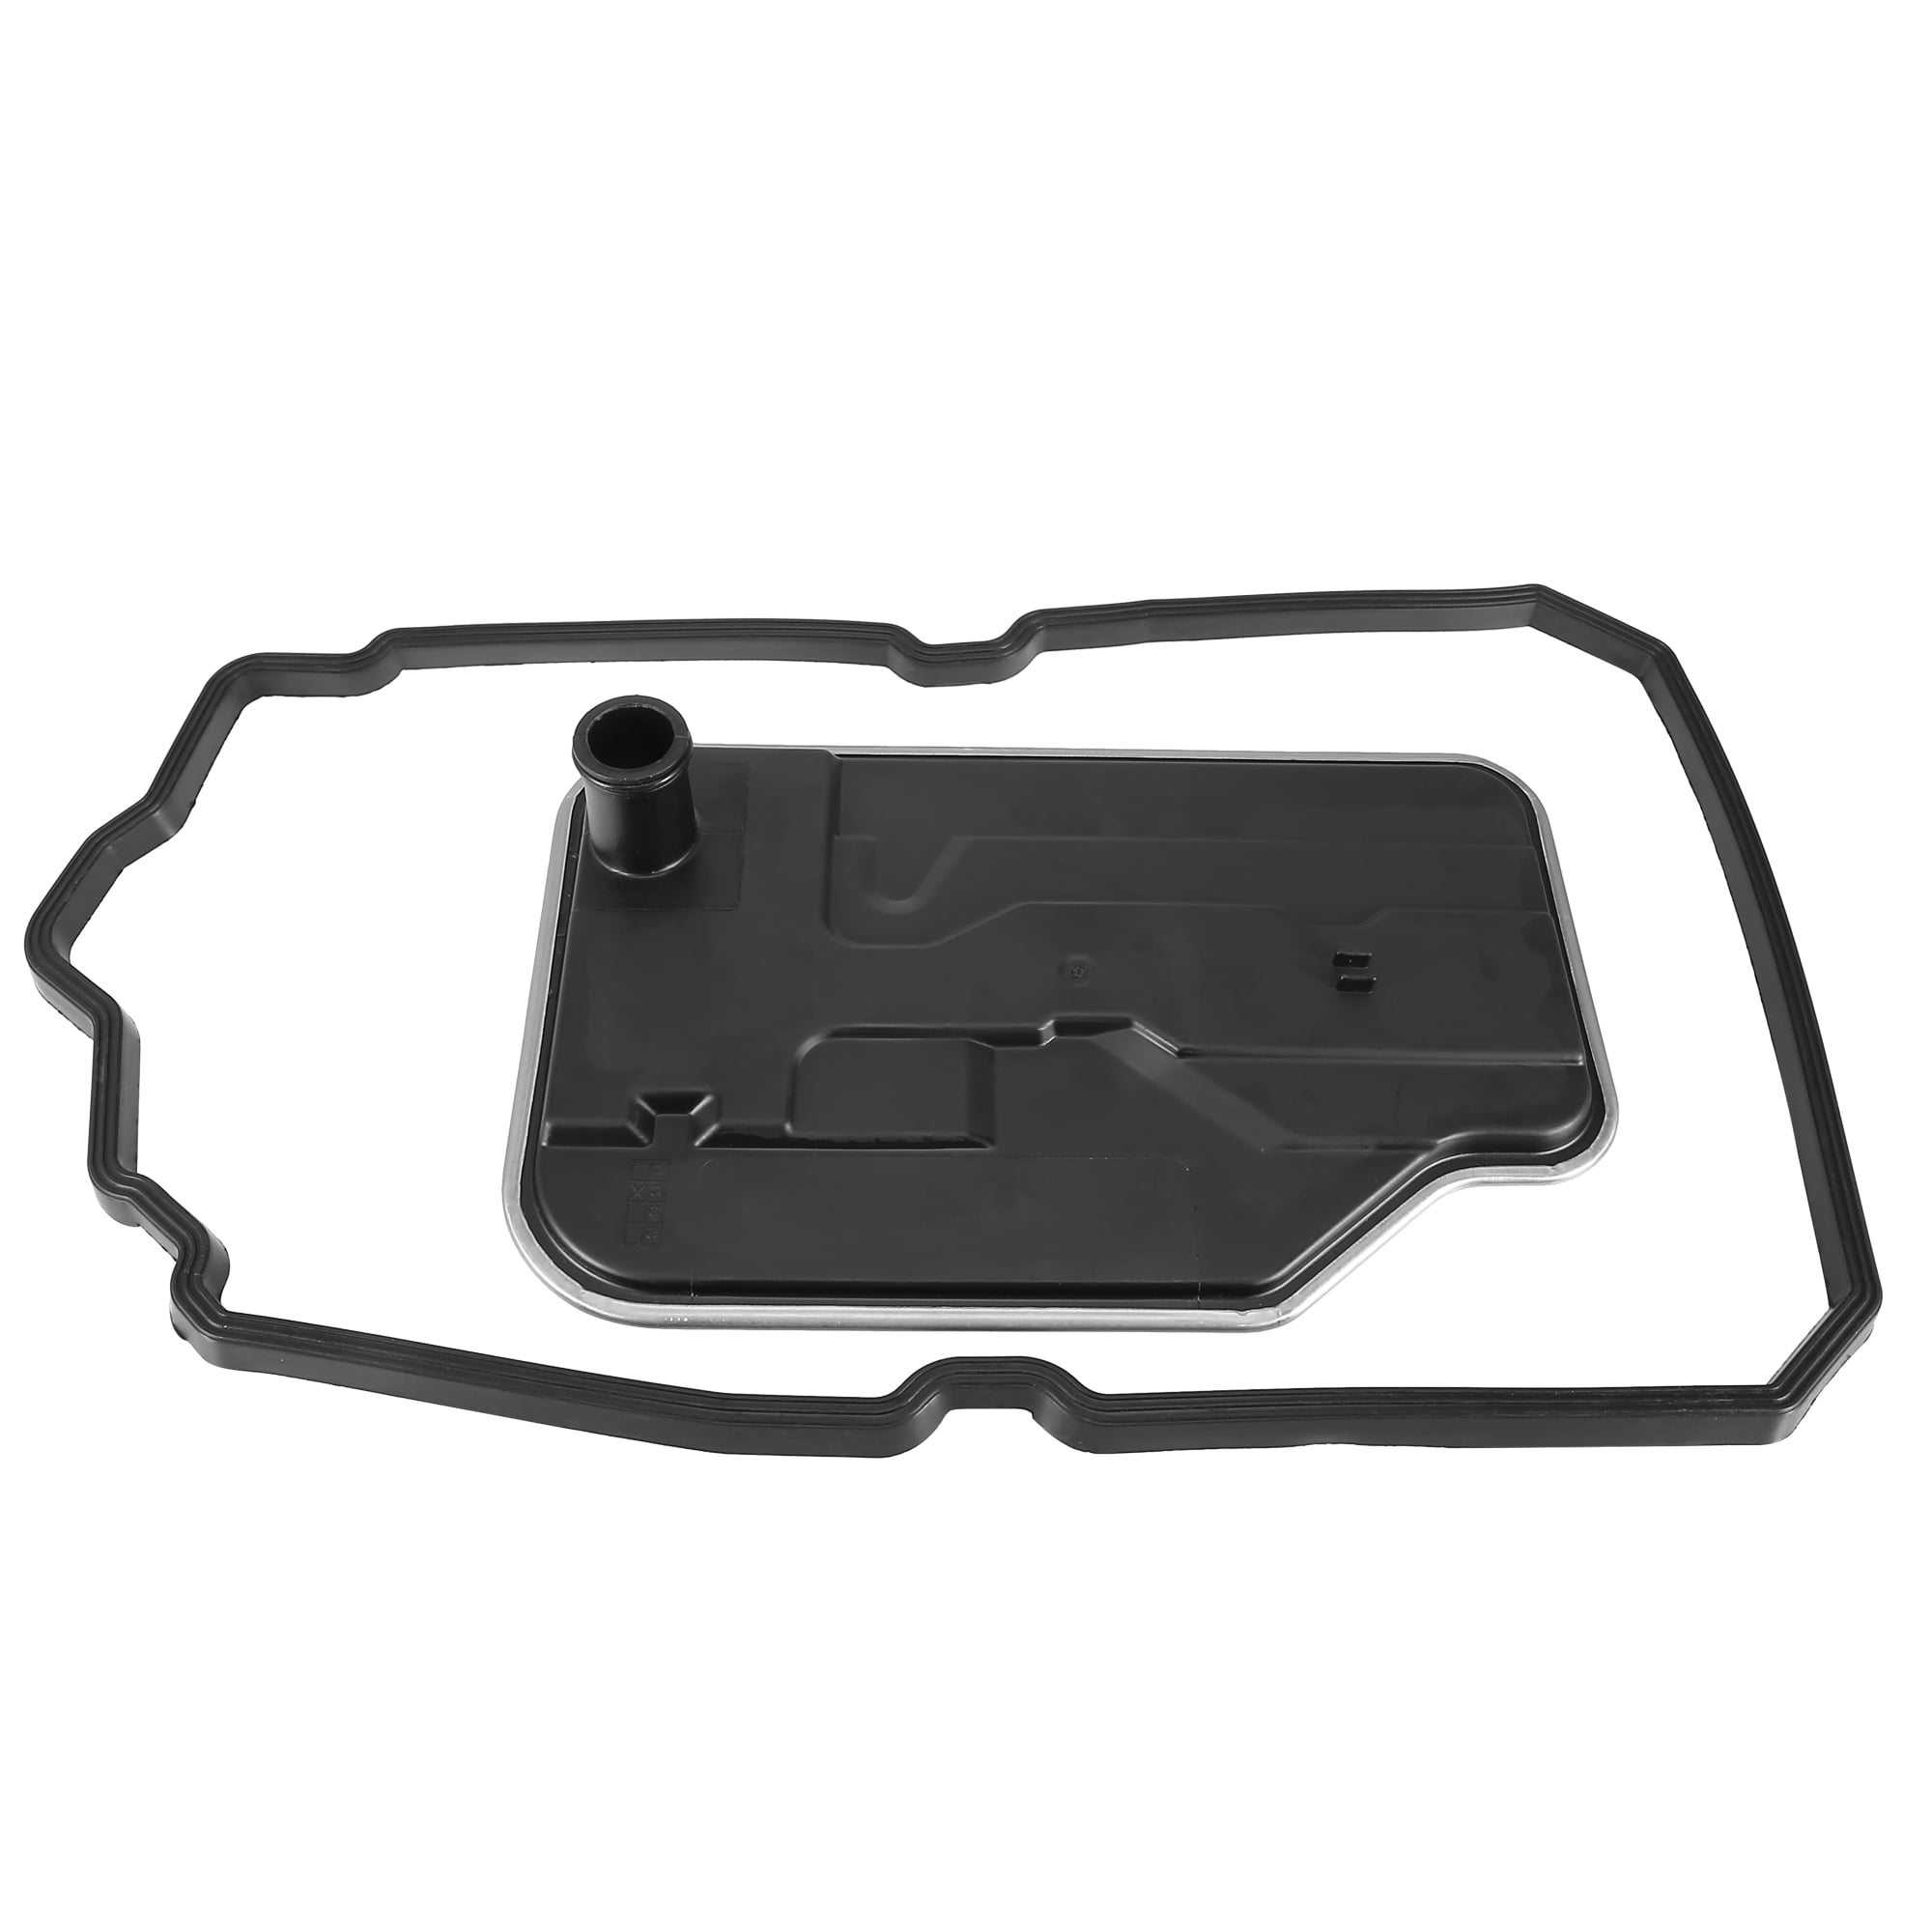 Inconvenience Ass goose Automatic Transmission Filter Oil Pan Gasket Replacement Kit for  Mercedes-Benz W221 W219 722.9 2202770695 2202770395 - Walmart.com